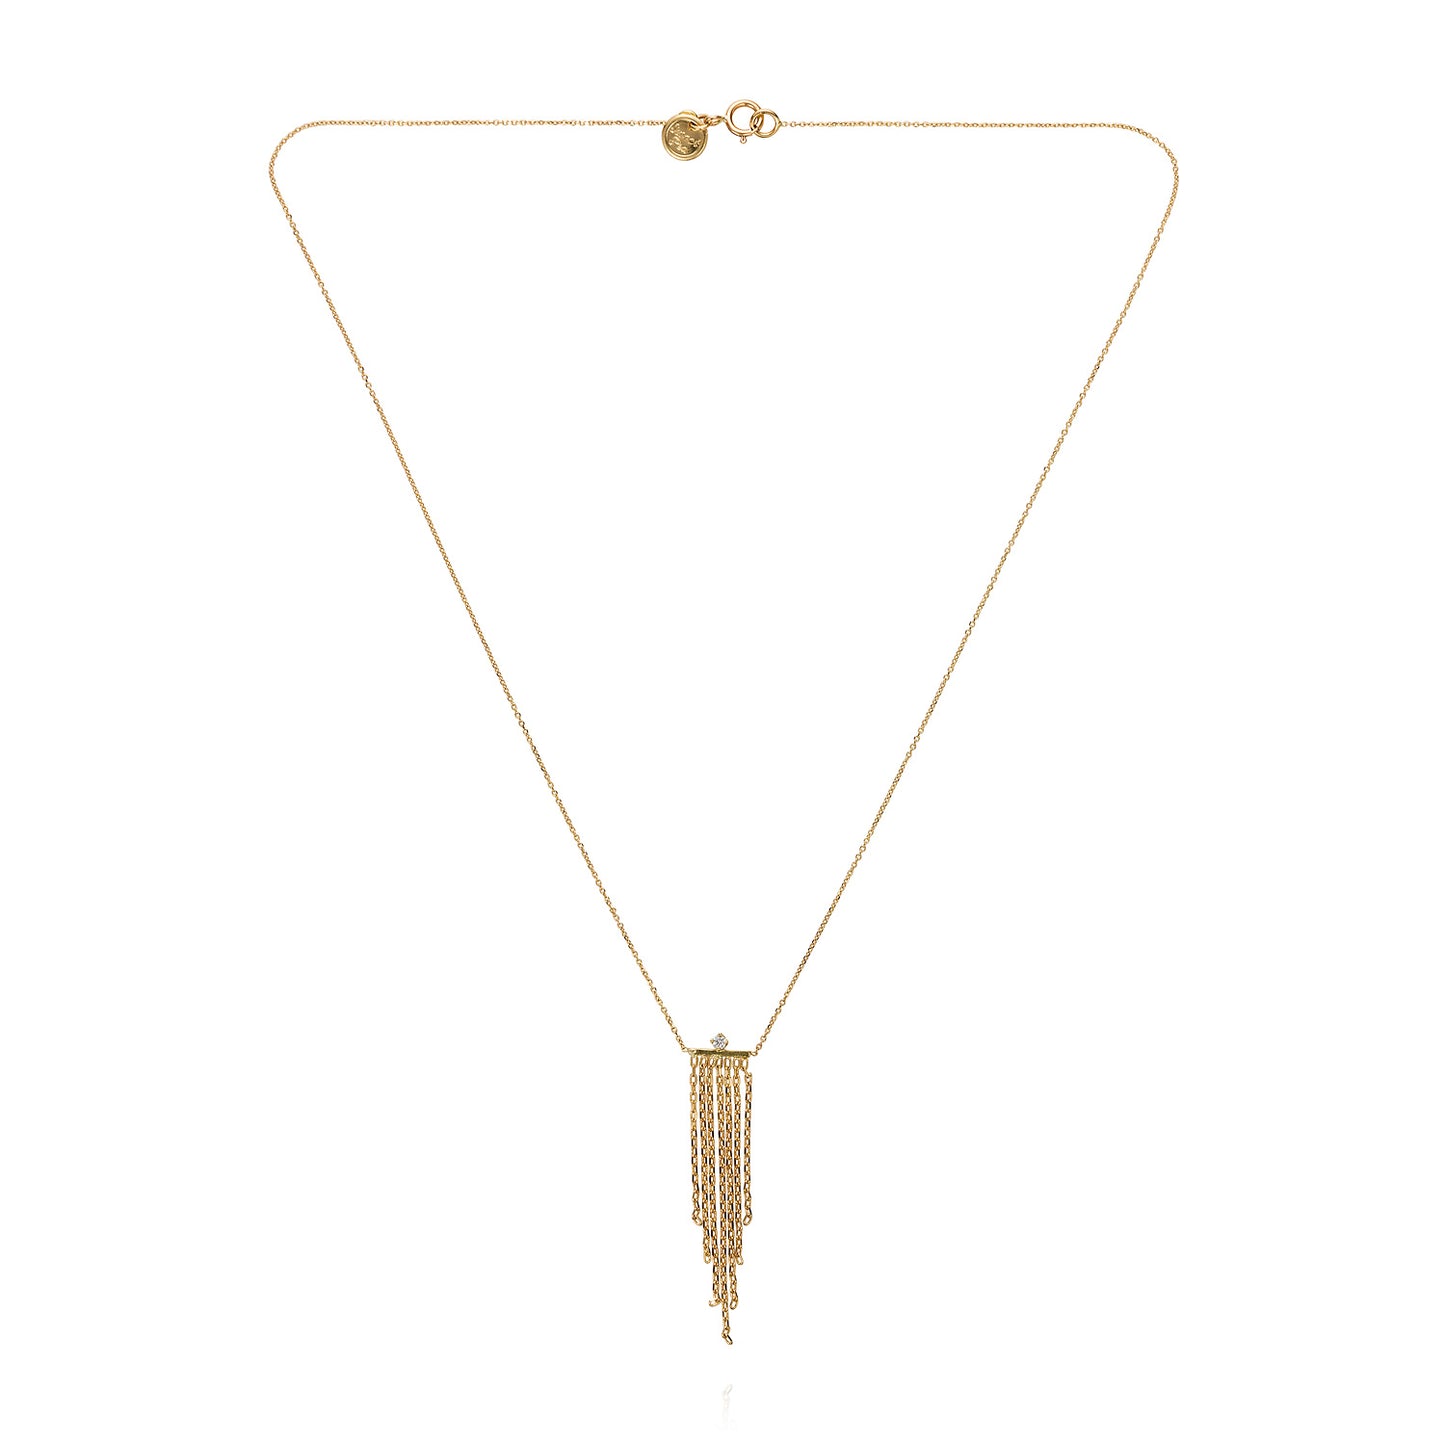 18ct yellow gold fine chain necklace with diamond and tapered fringe